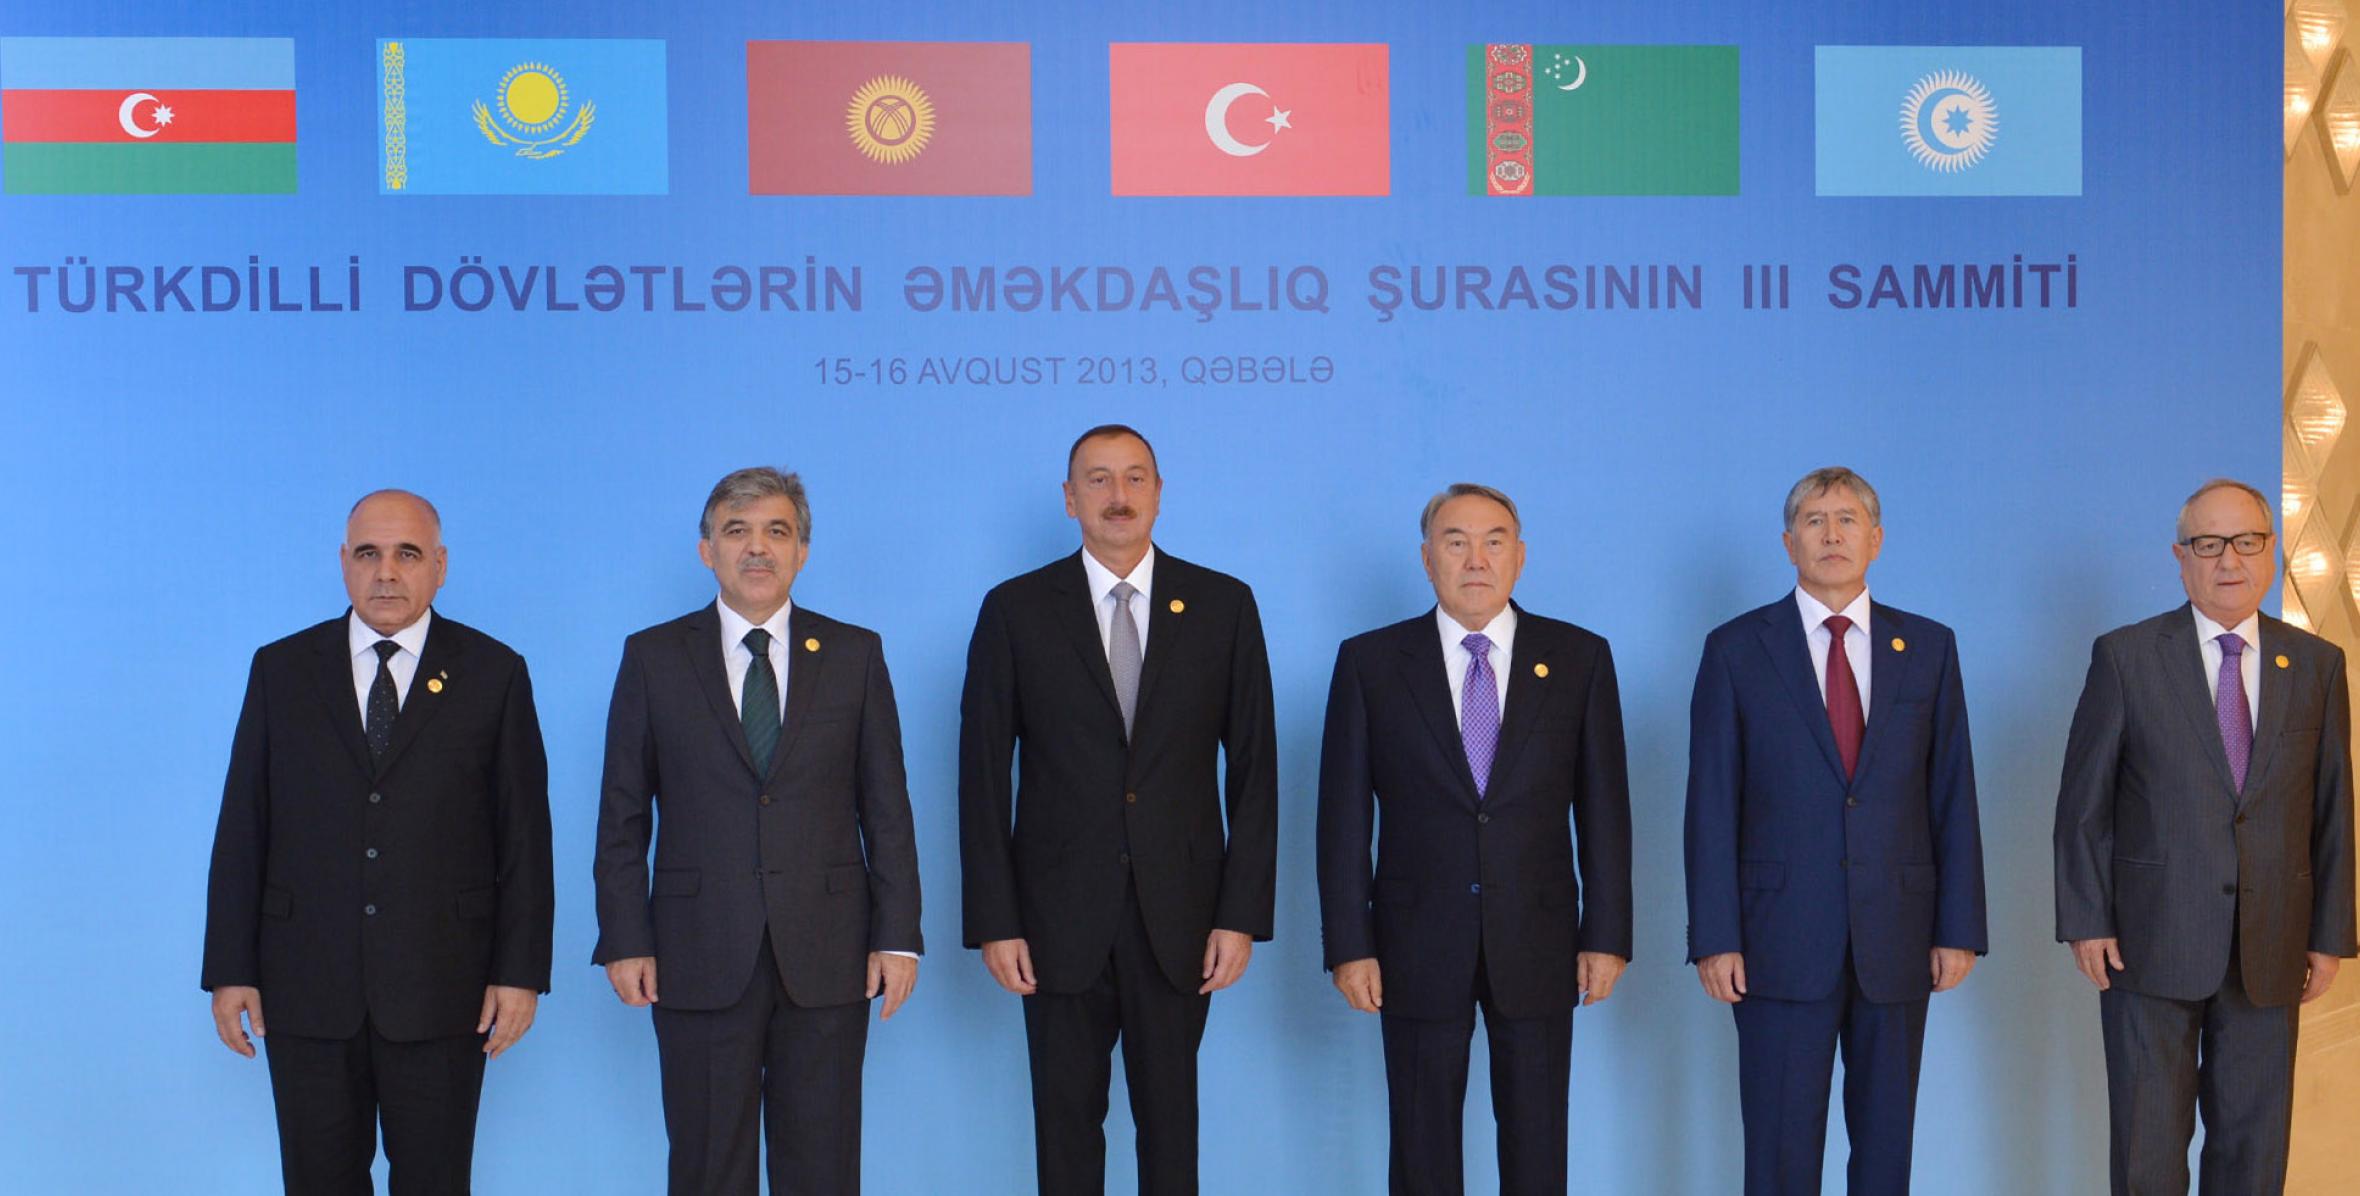 Third Summit of the Cooperation Council of Turkic-speaking States was held in Gabala